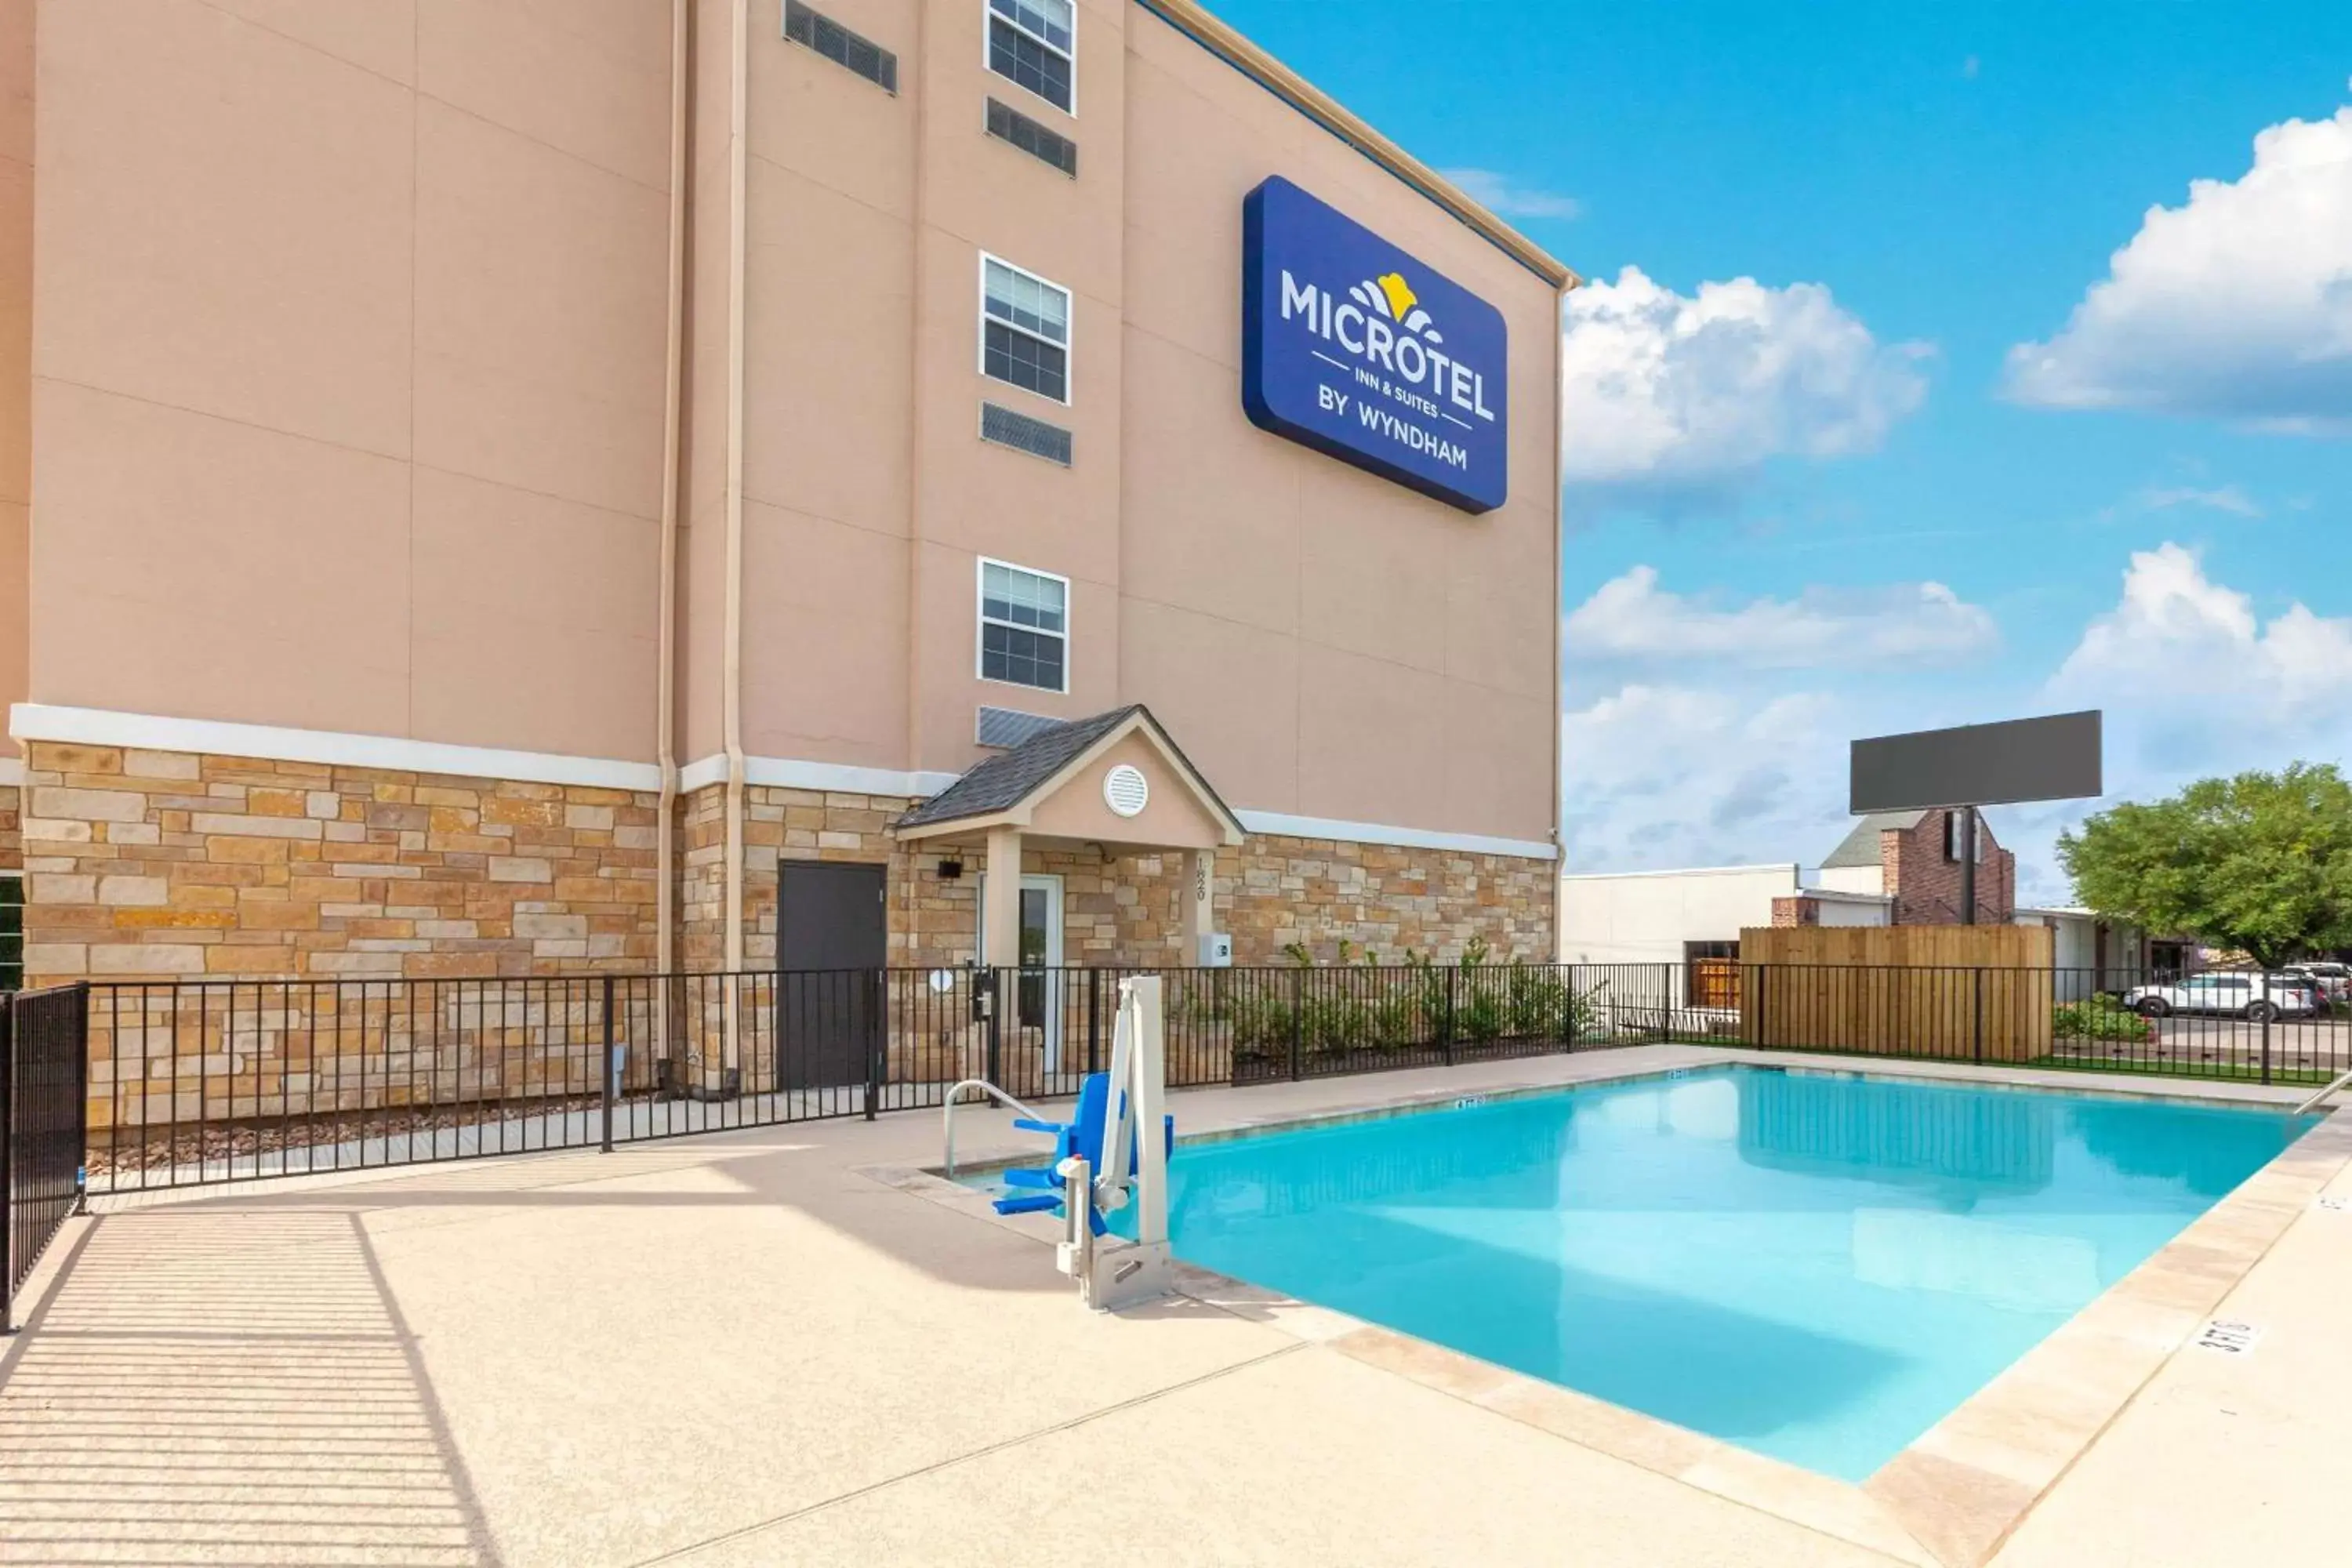 On site, Property Building in Microtel Inn & Suites by Wyndham College Station